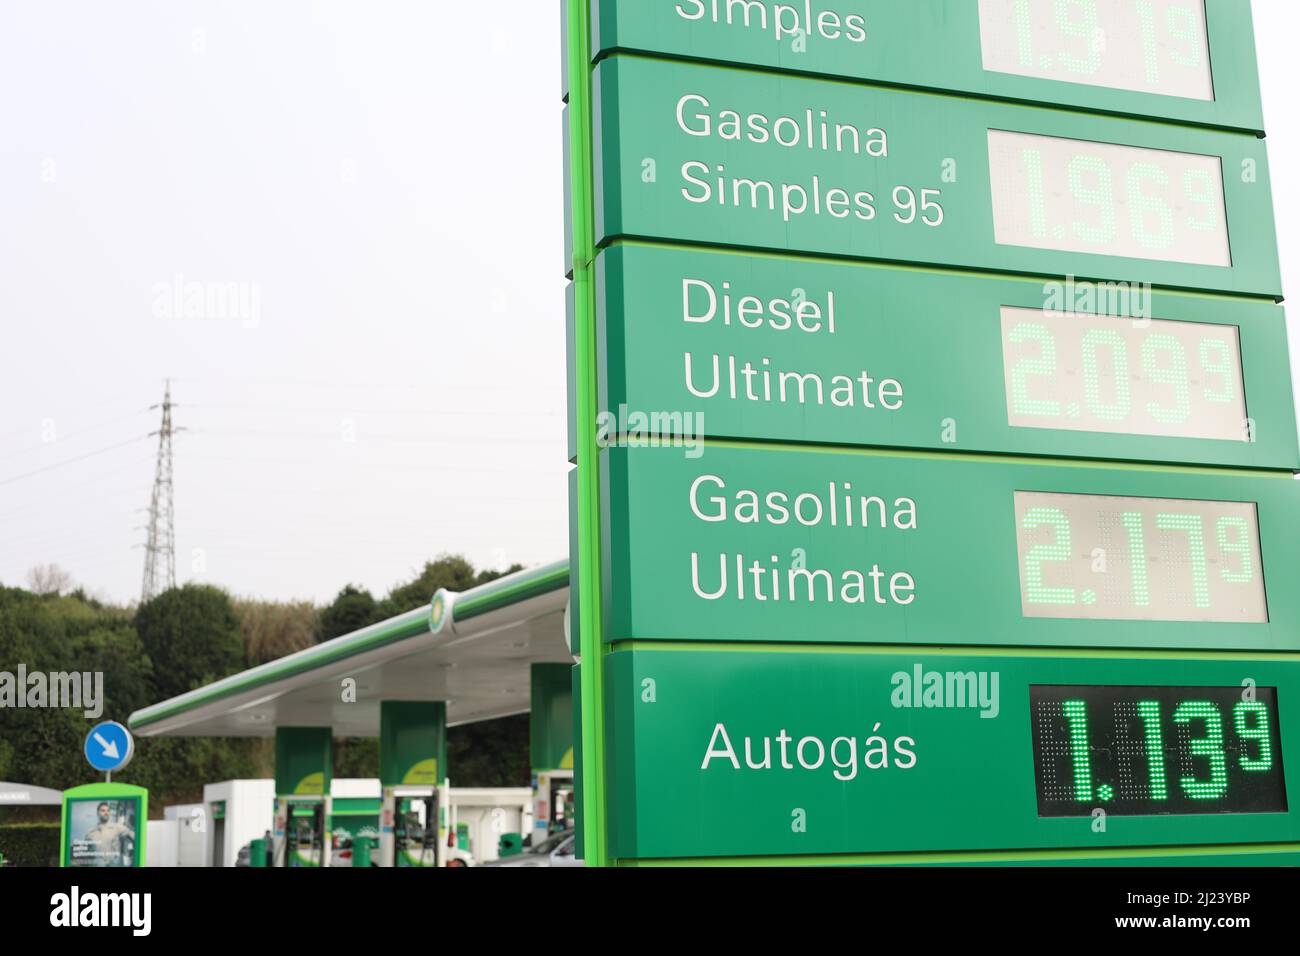 Pumping Station Petroleum Gas Filling Station High Prices Stock Photo